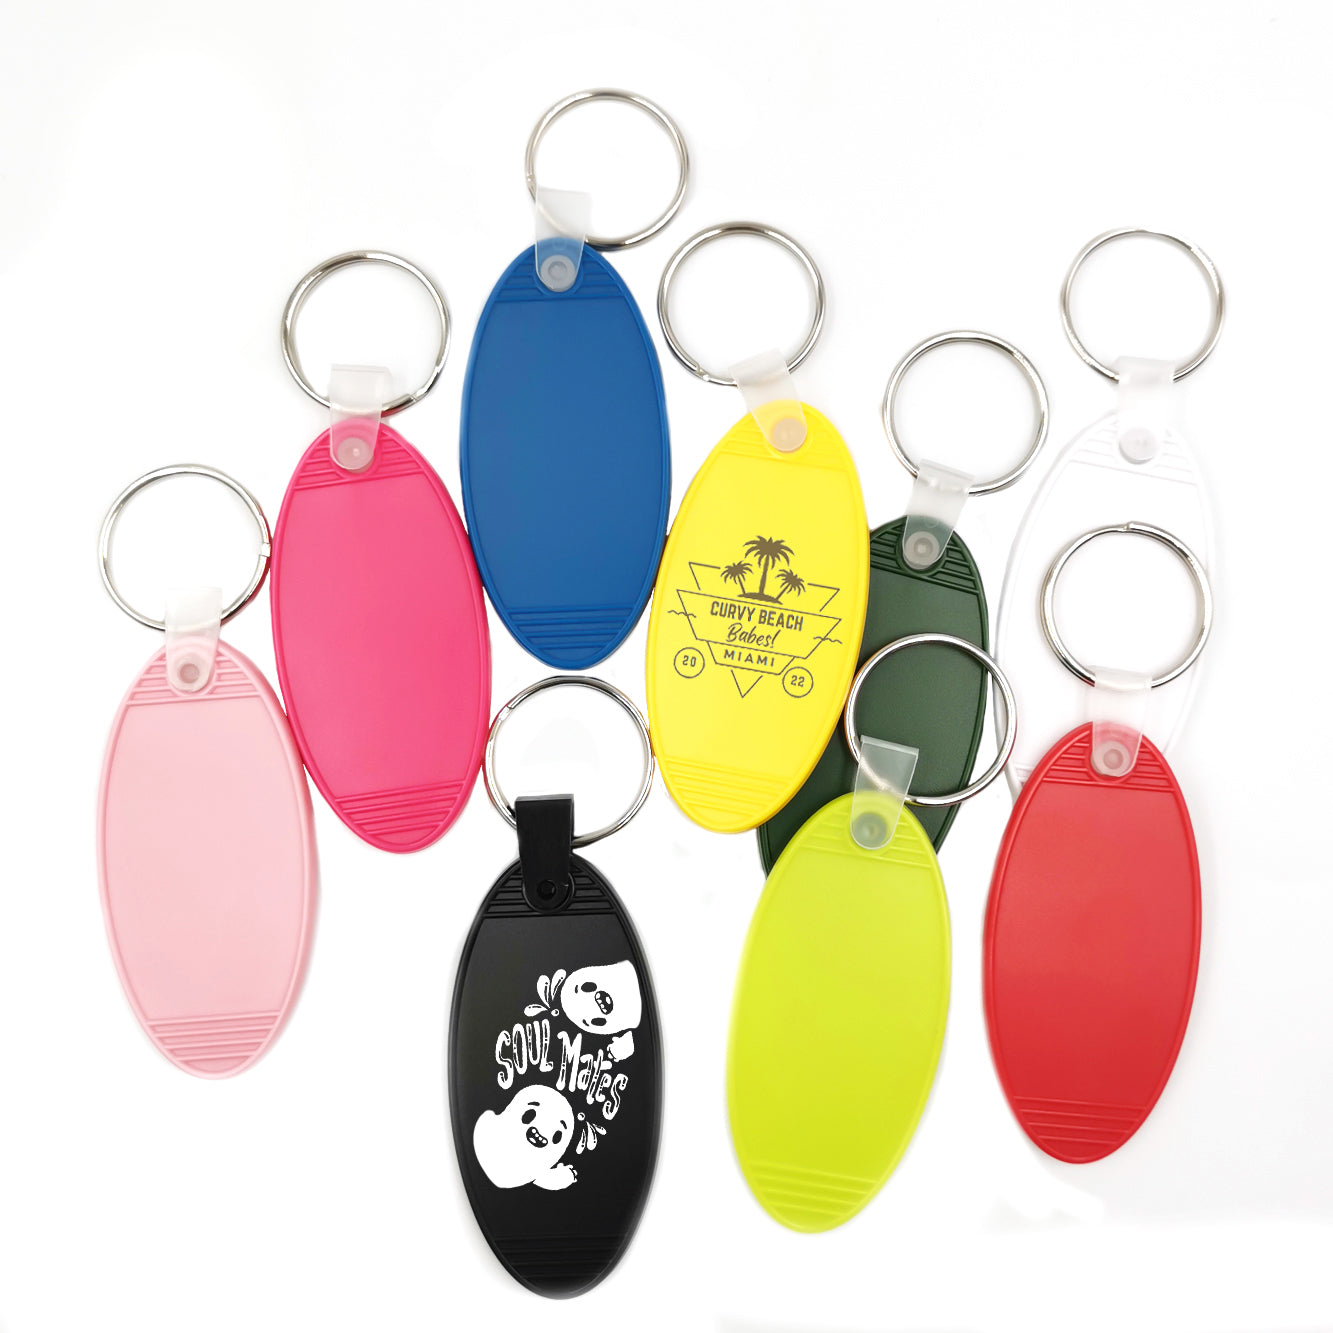 Personalised Keyring - Clear Acrylic OVAL - Ideal for Hotels, Bed and Breakfast, Guest Houses